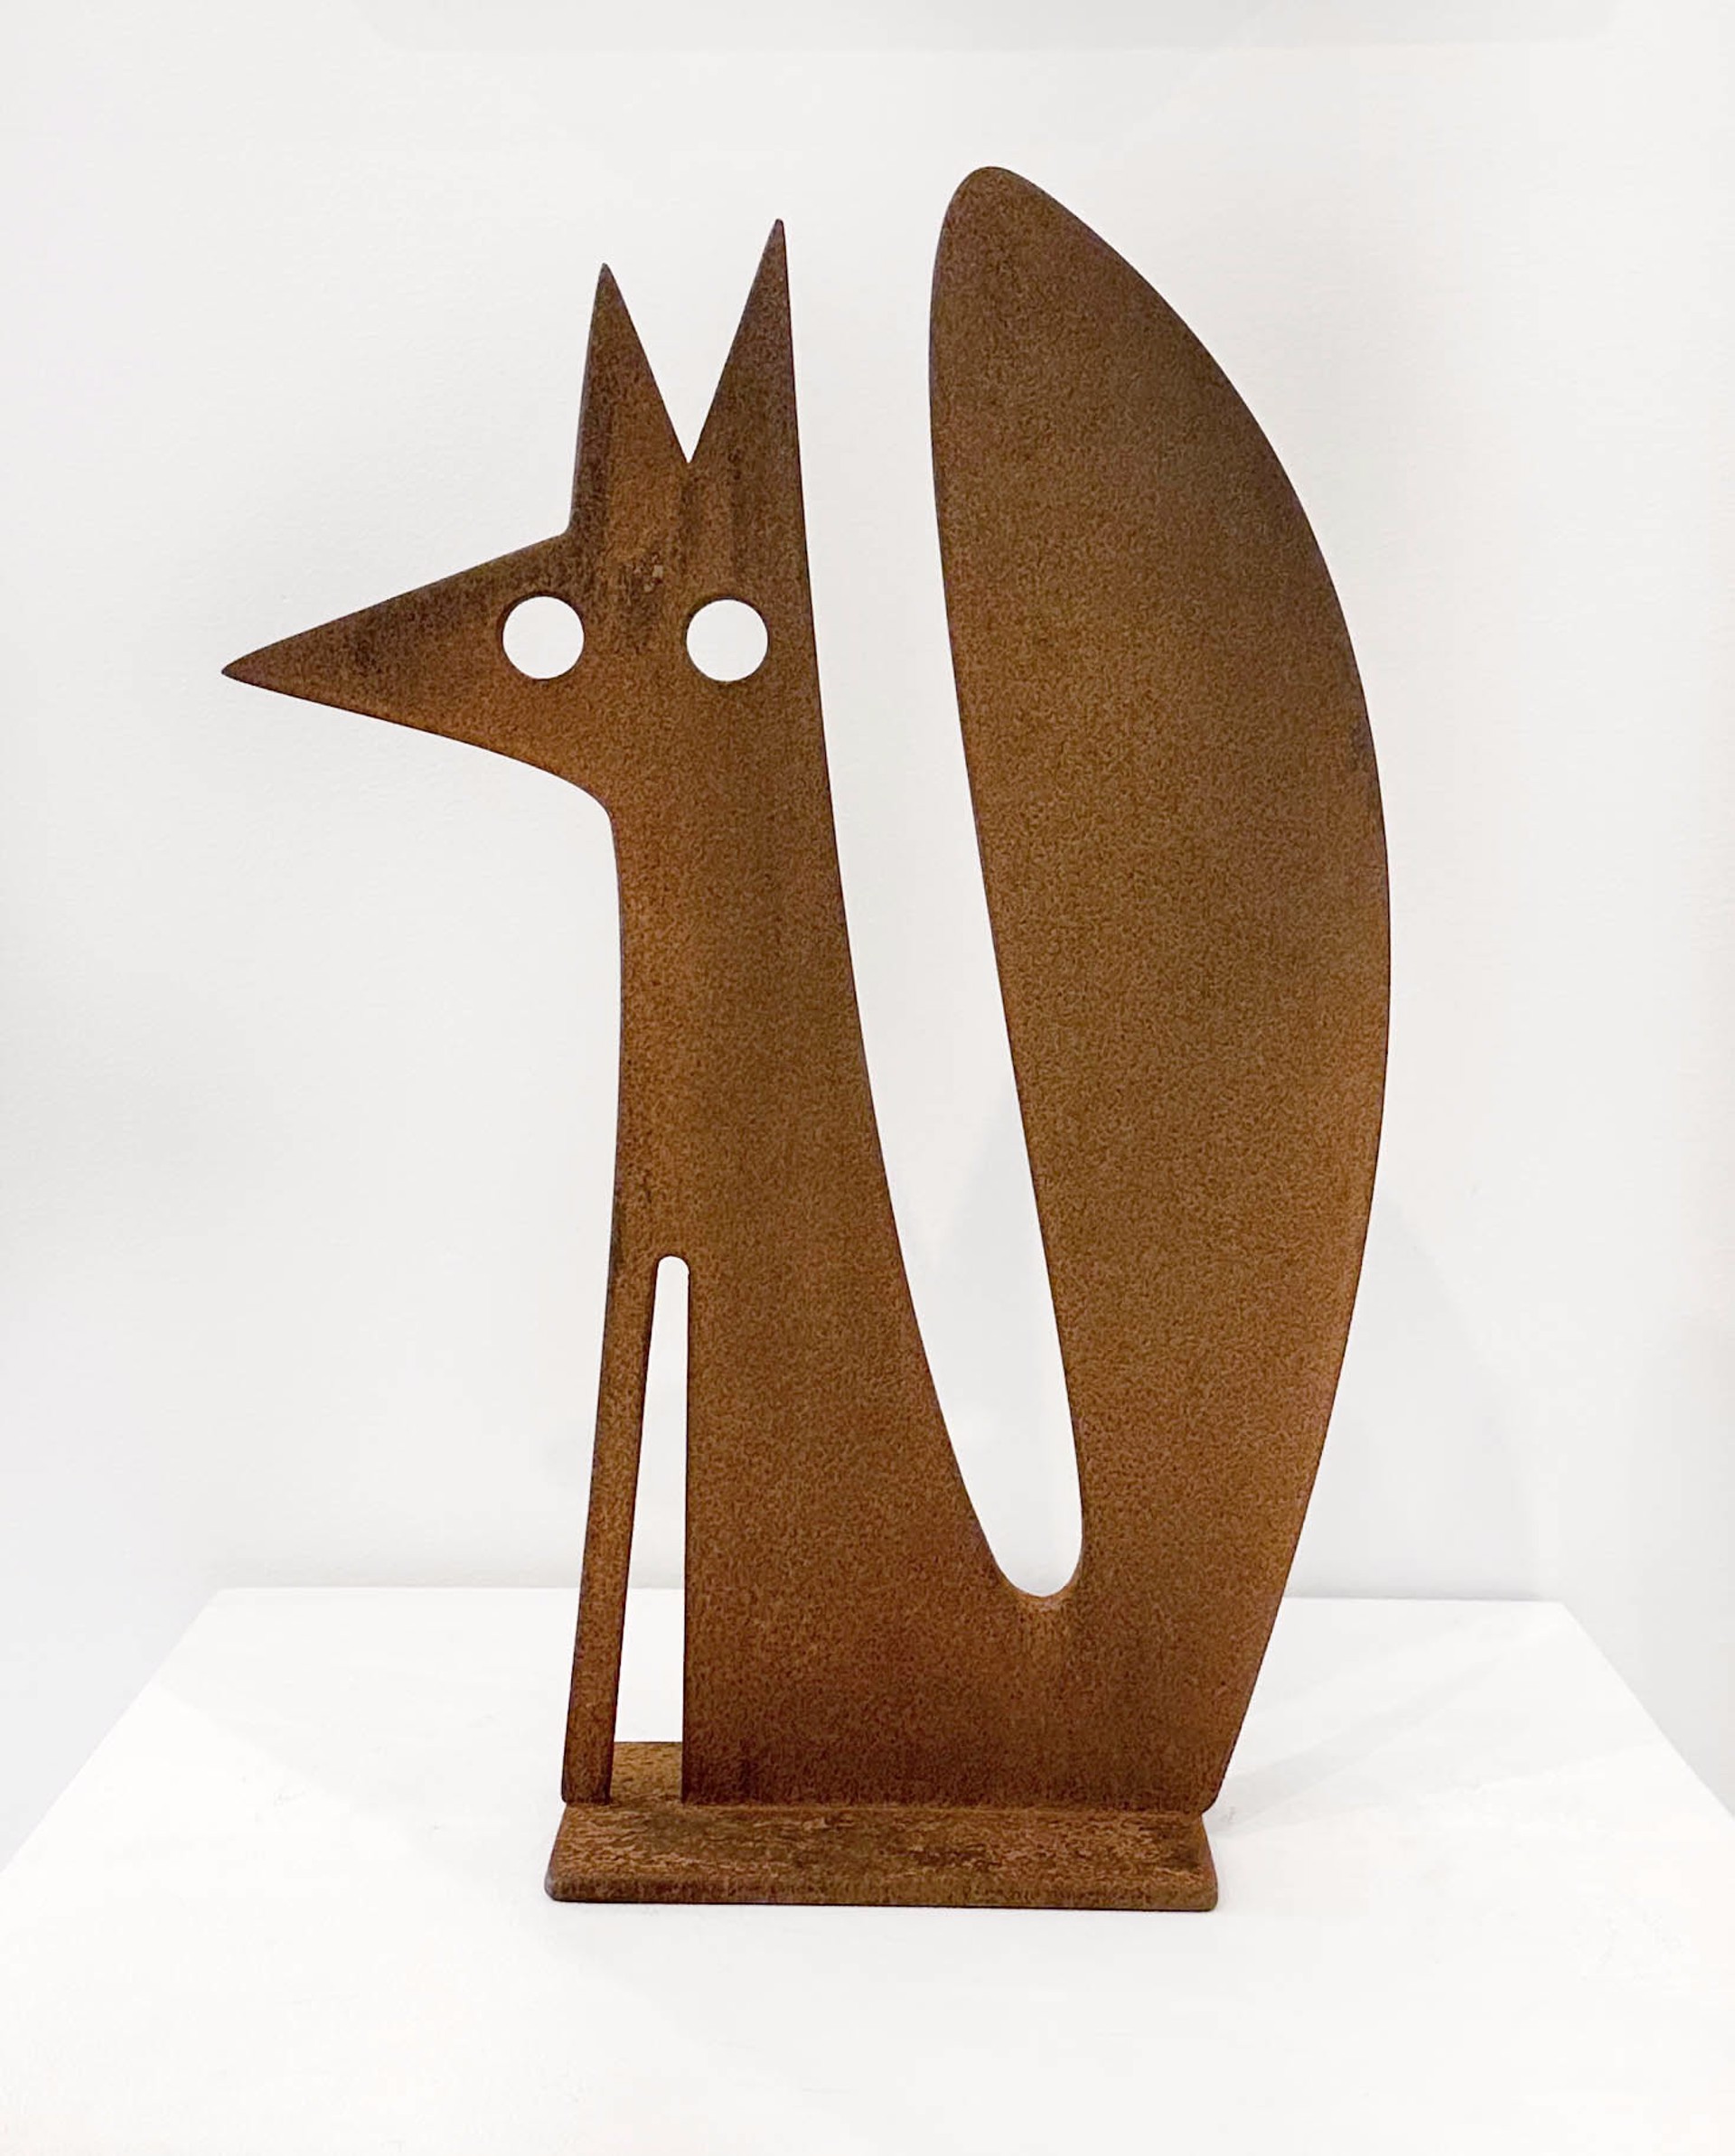 Steel Sculpture By Jeffie Brewer Featuring A Seated Fox In Rusty Finish